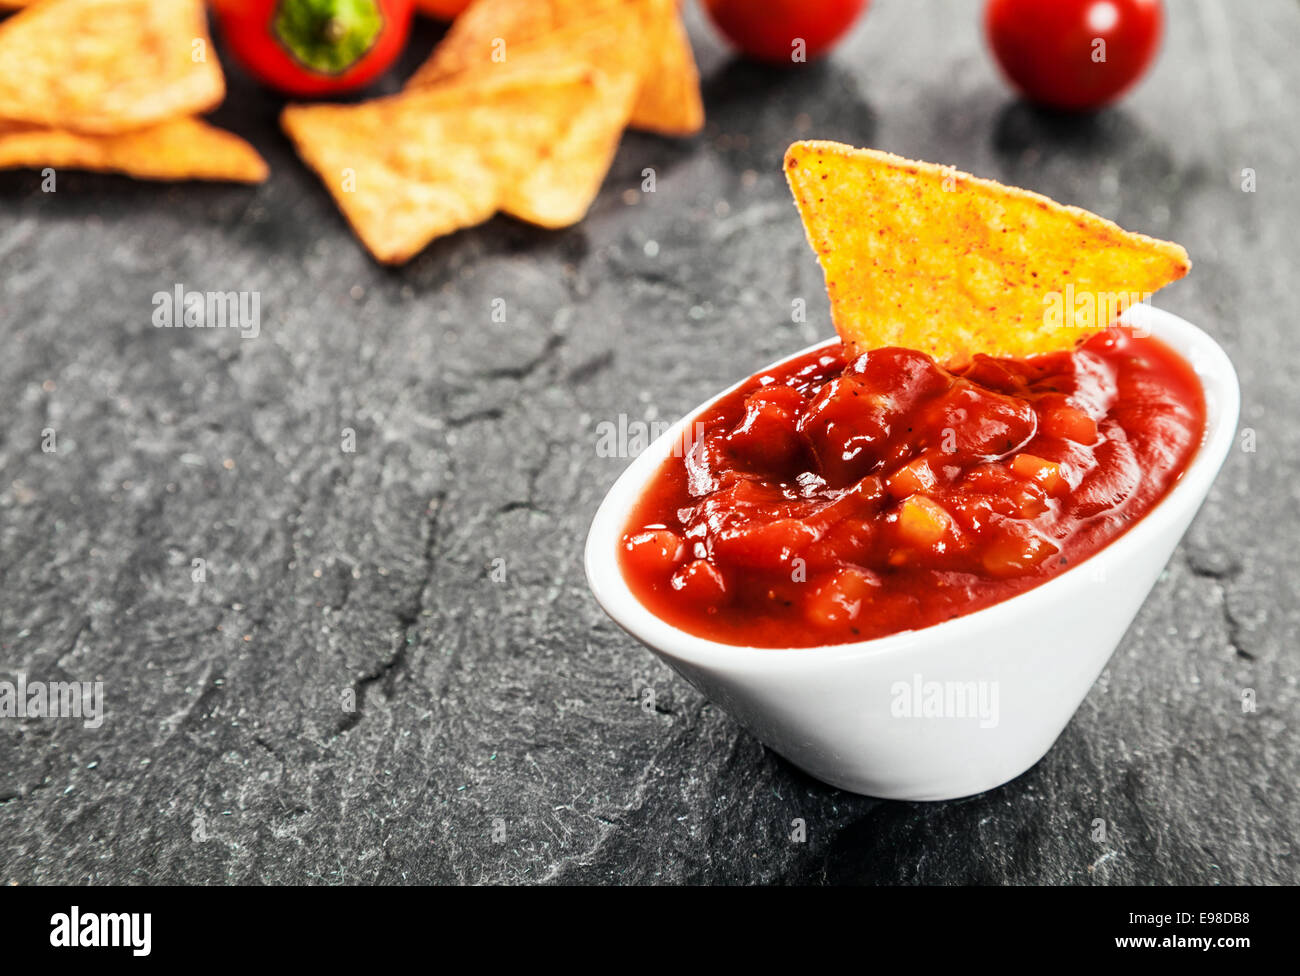 Serving of hot spicy salsa sauce made with tomato and chili peppers in a bowl with corn tortillas or nachos to dip for a savory Stock Photo